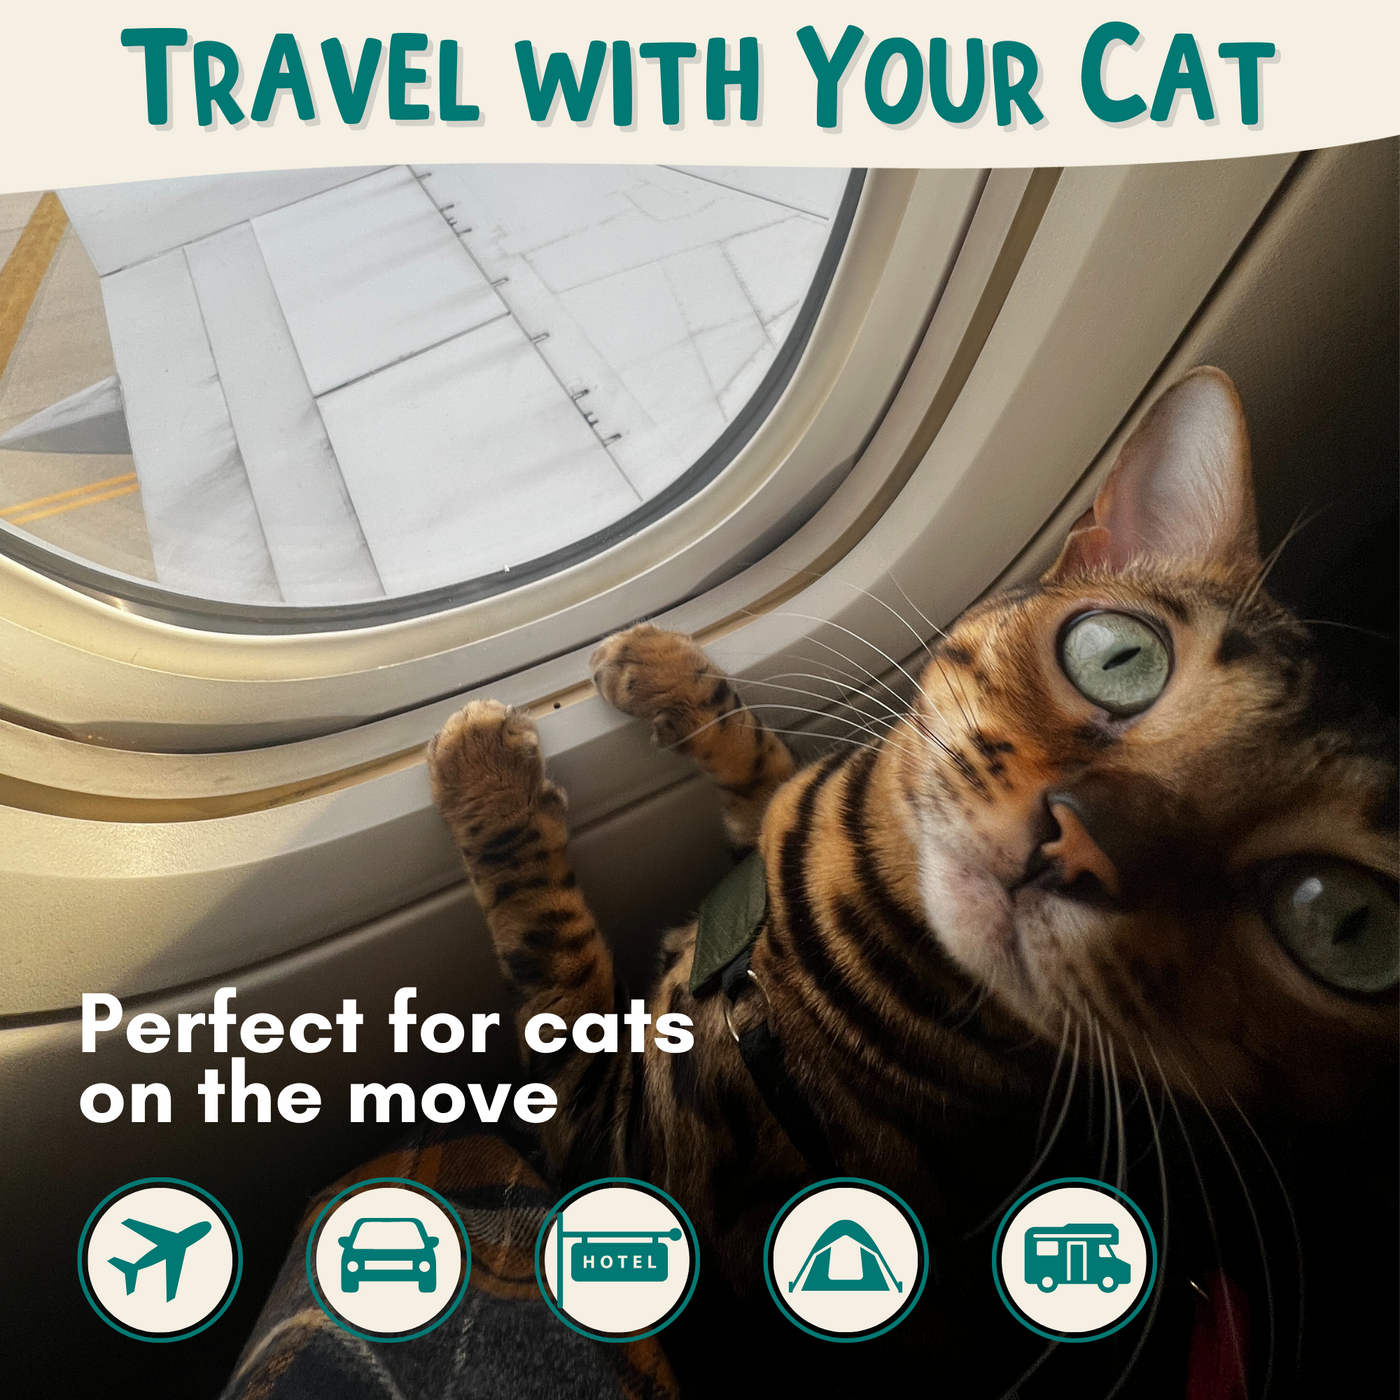 Portable Litterbox for Travel